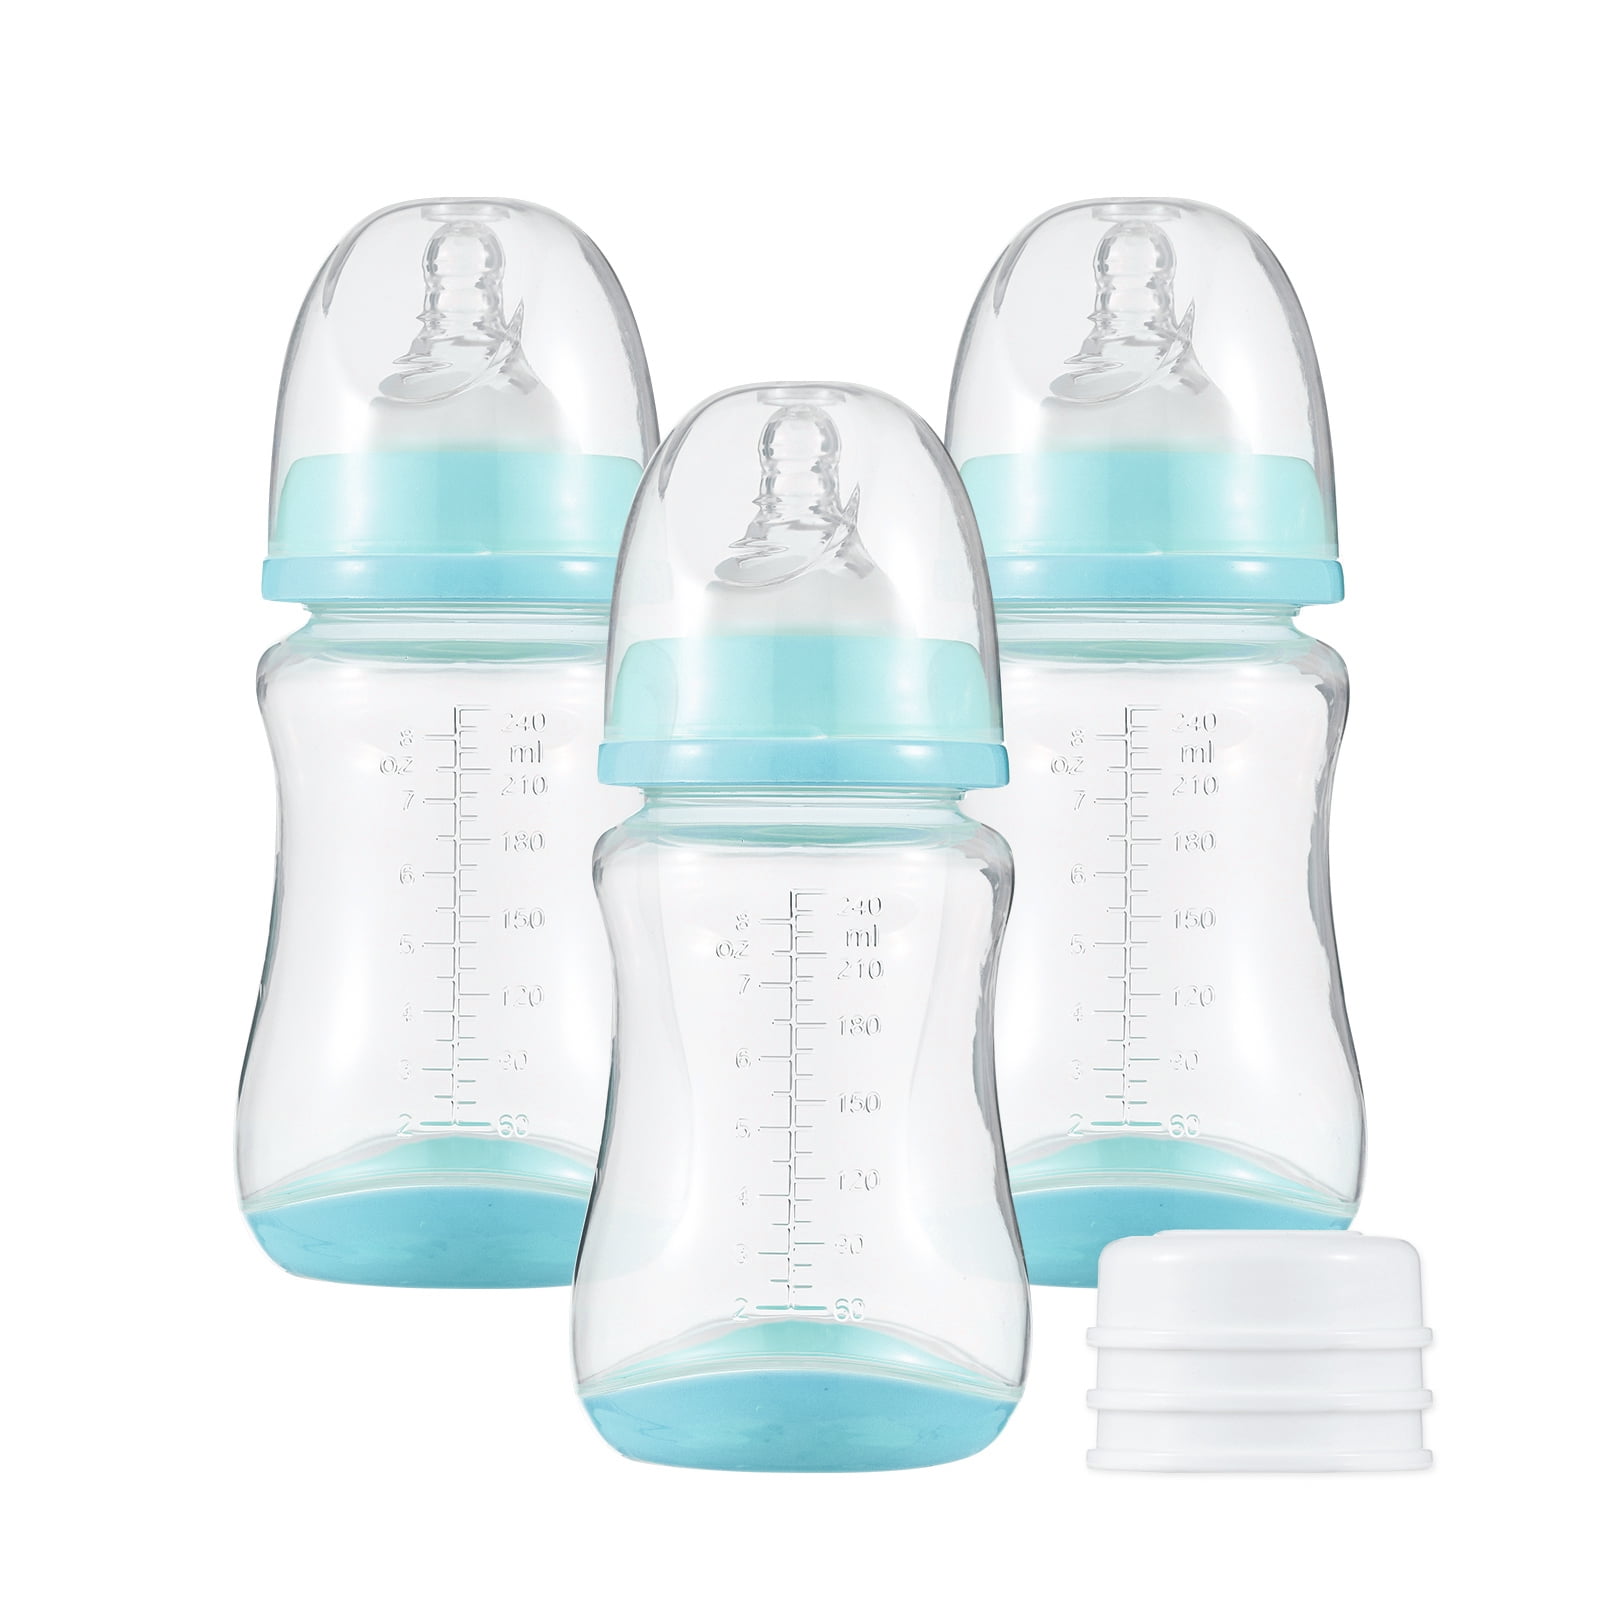 moobody Baby Bottles with Silicone Nipple & Storage Cover Breastfeeding  Bottles for Baby Food Grade Milk Storage Bottles 180ml Capacity Baby  Feeding